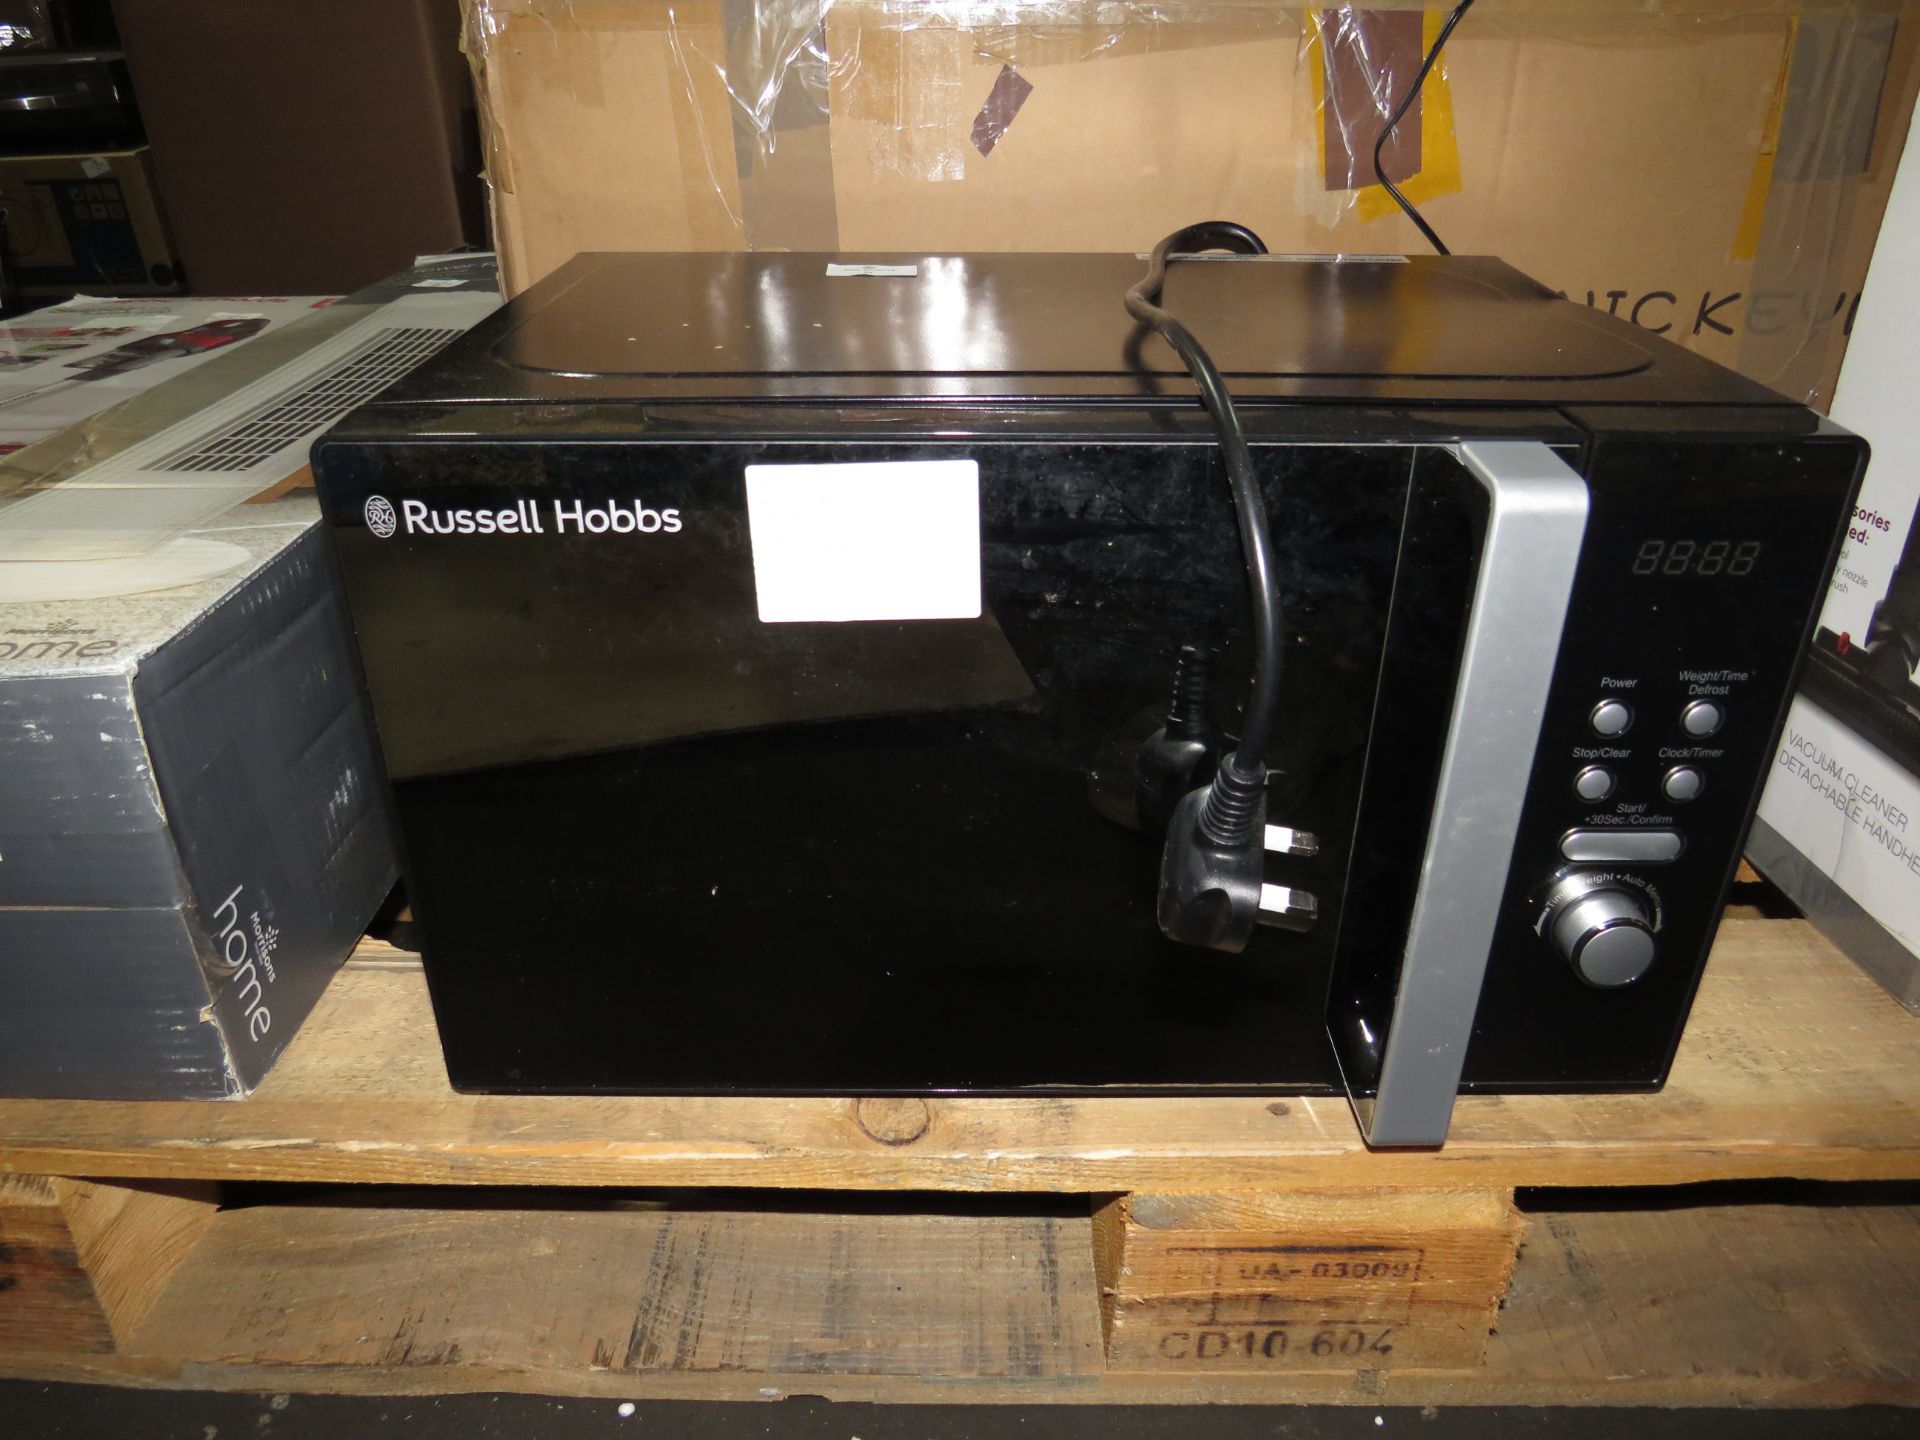 russell hobbs Black digital microwave, tested wrolking for heat on a short cycle, has a dent on